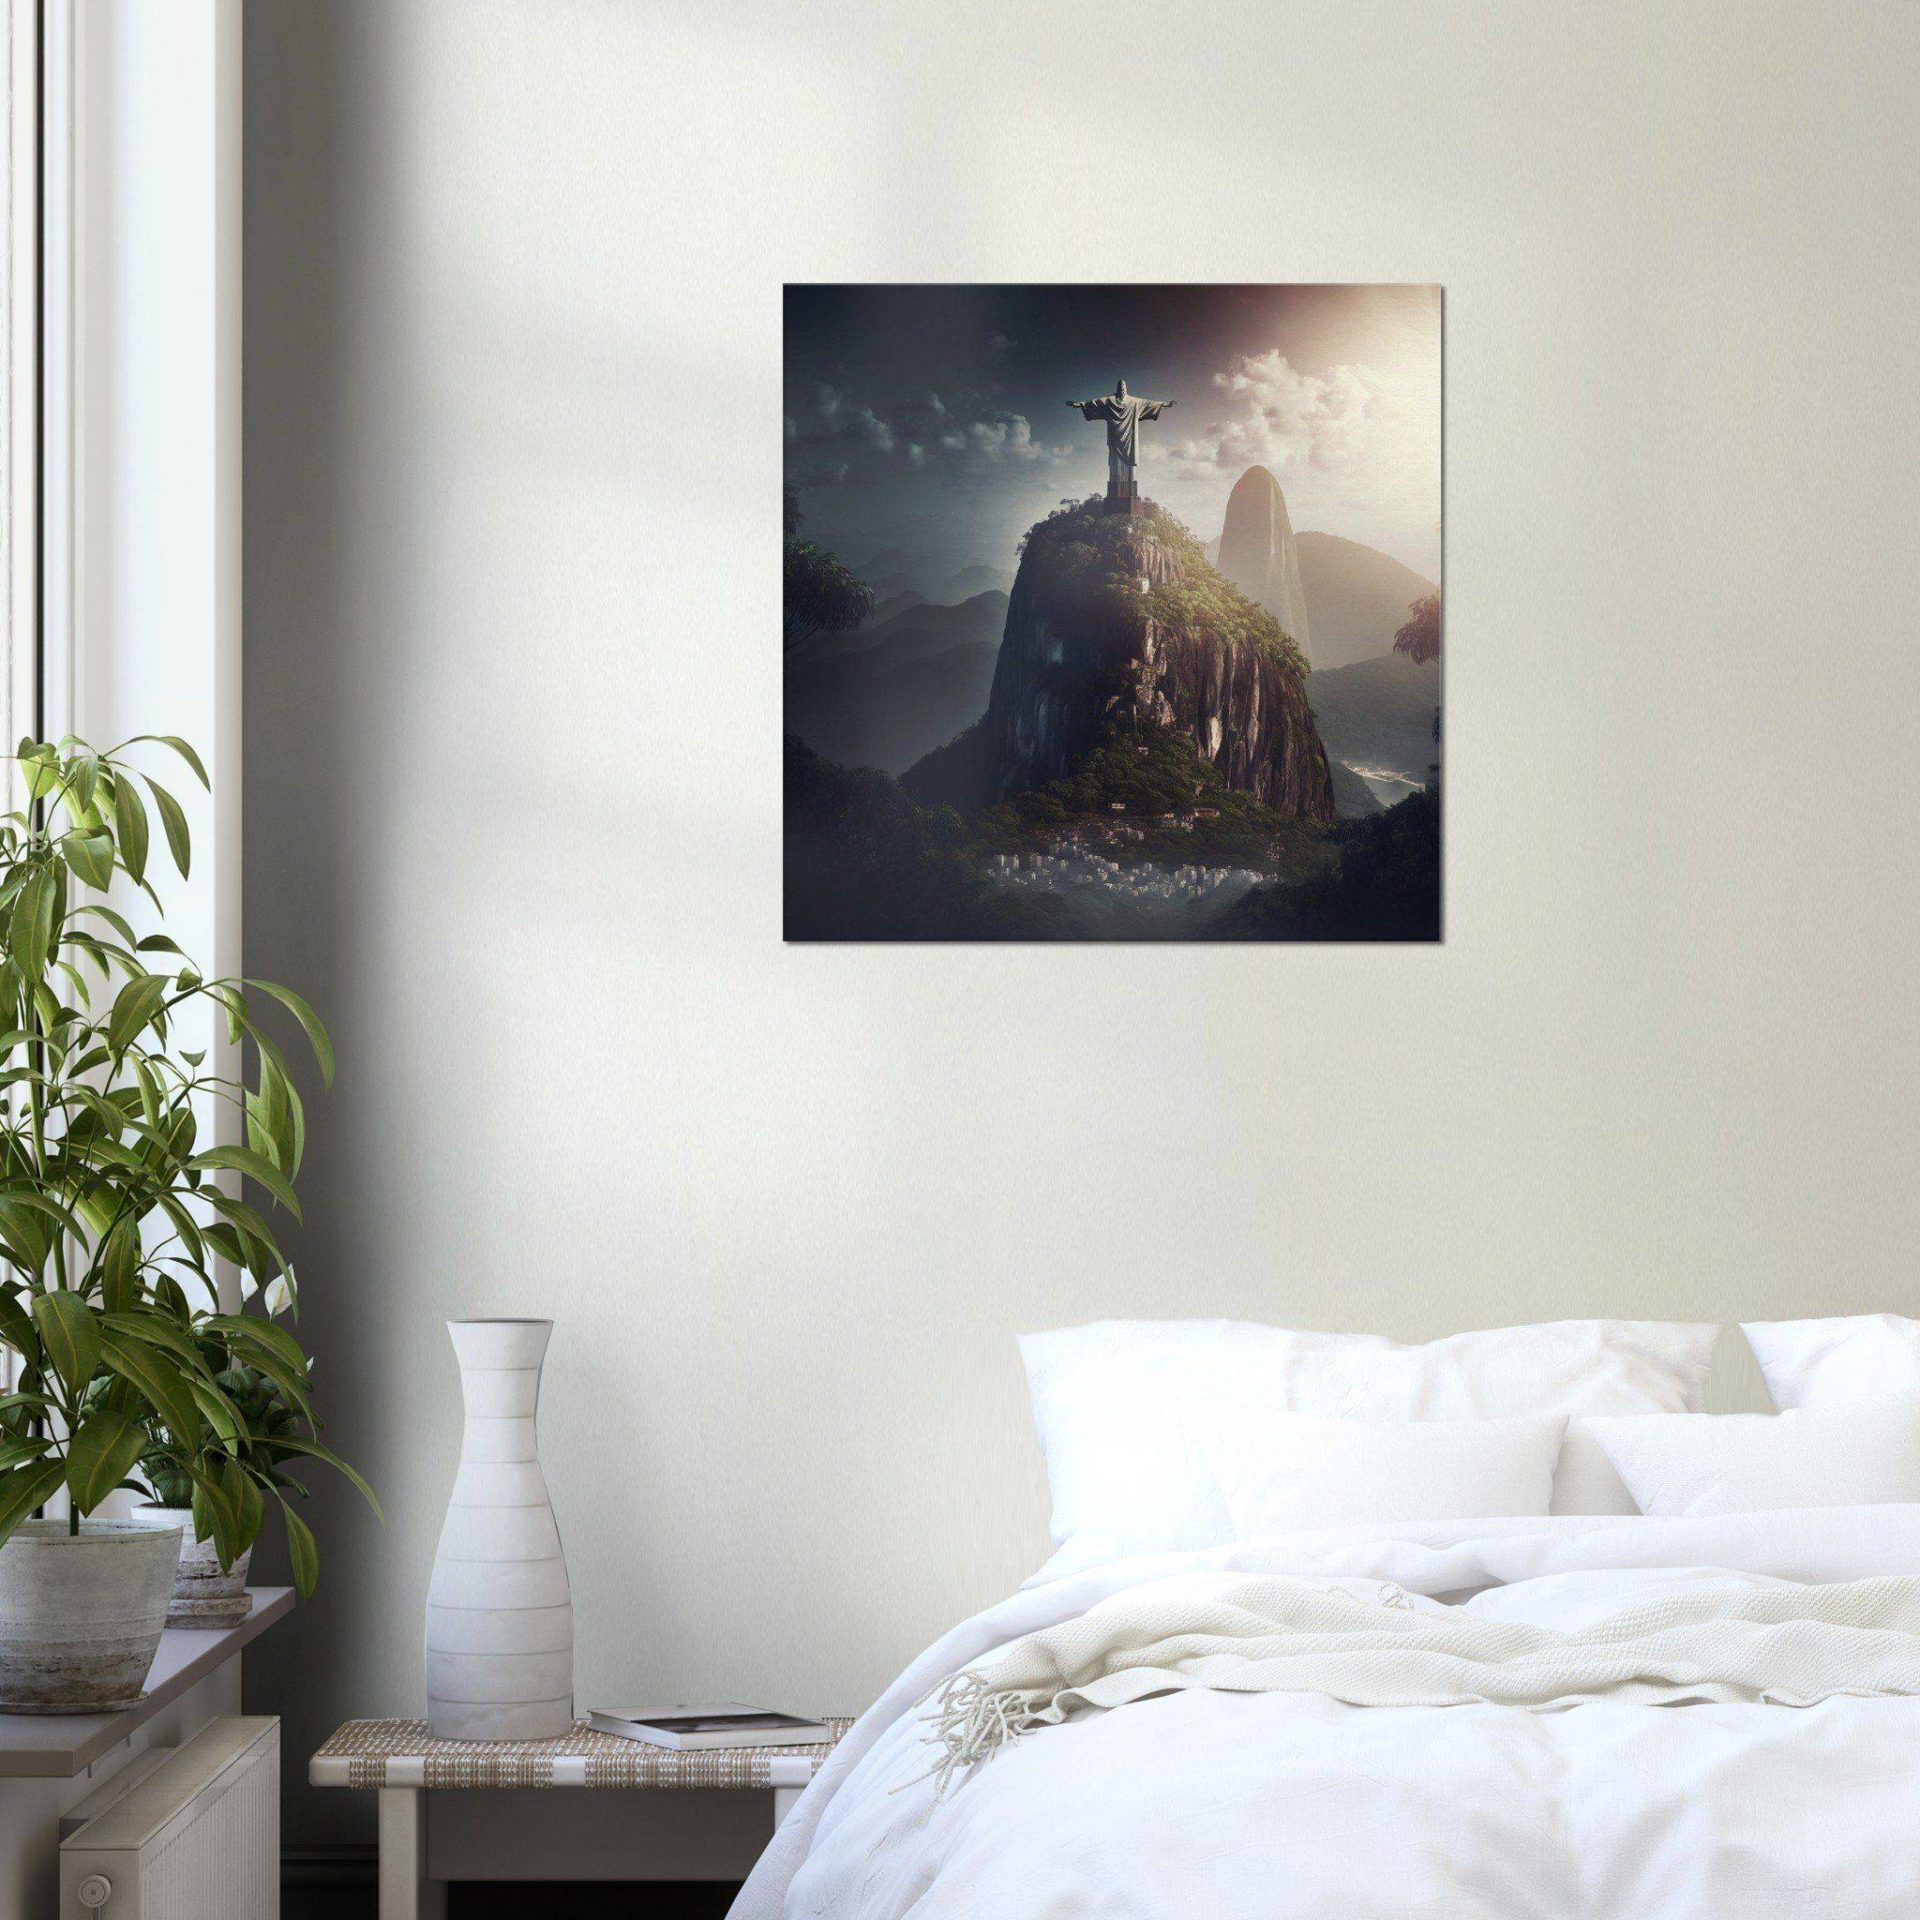 Christ the Redeemer 1 / 60 x 60cm (Canvas Print) Canvas Print Canvas reproduction The Pianist Print On Demand Fabled Gallery https://fabledgallery.art/product/christ-the-redeemer-1-60-x-60cm-canvas-print/